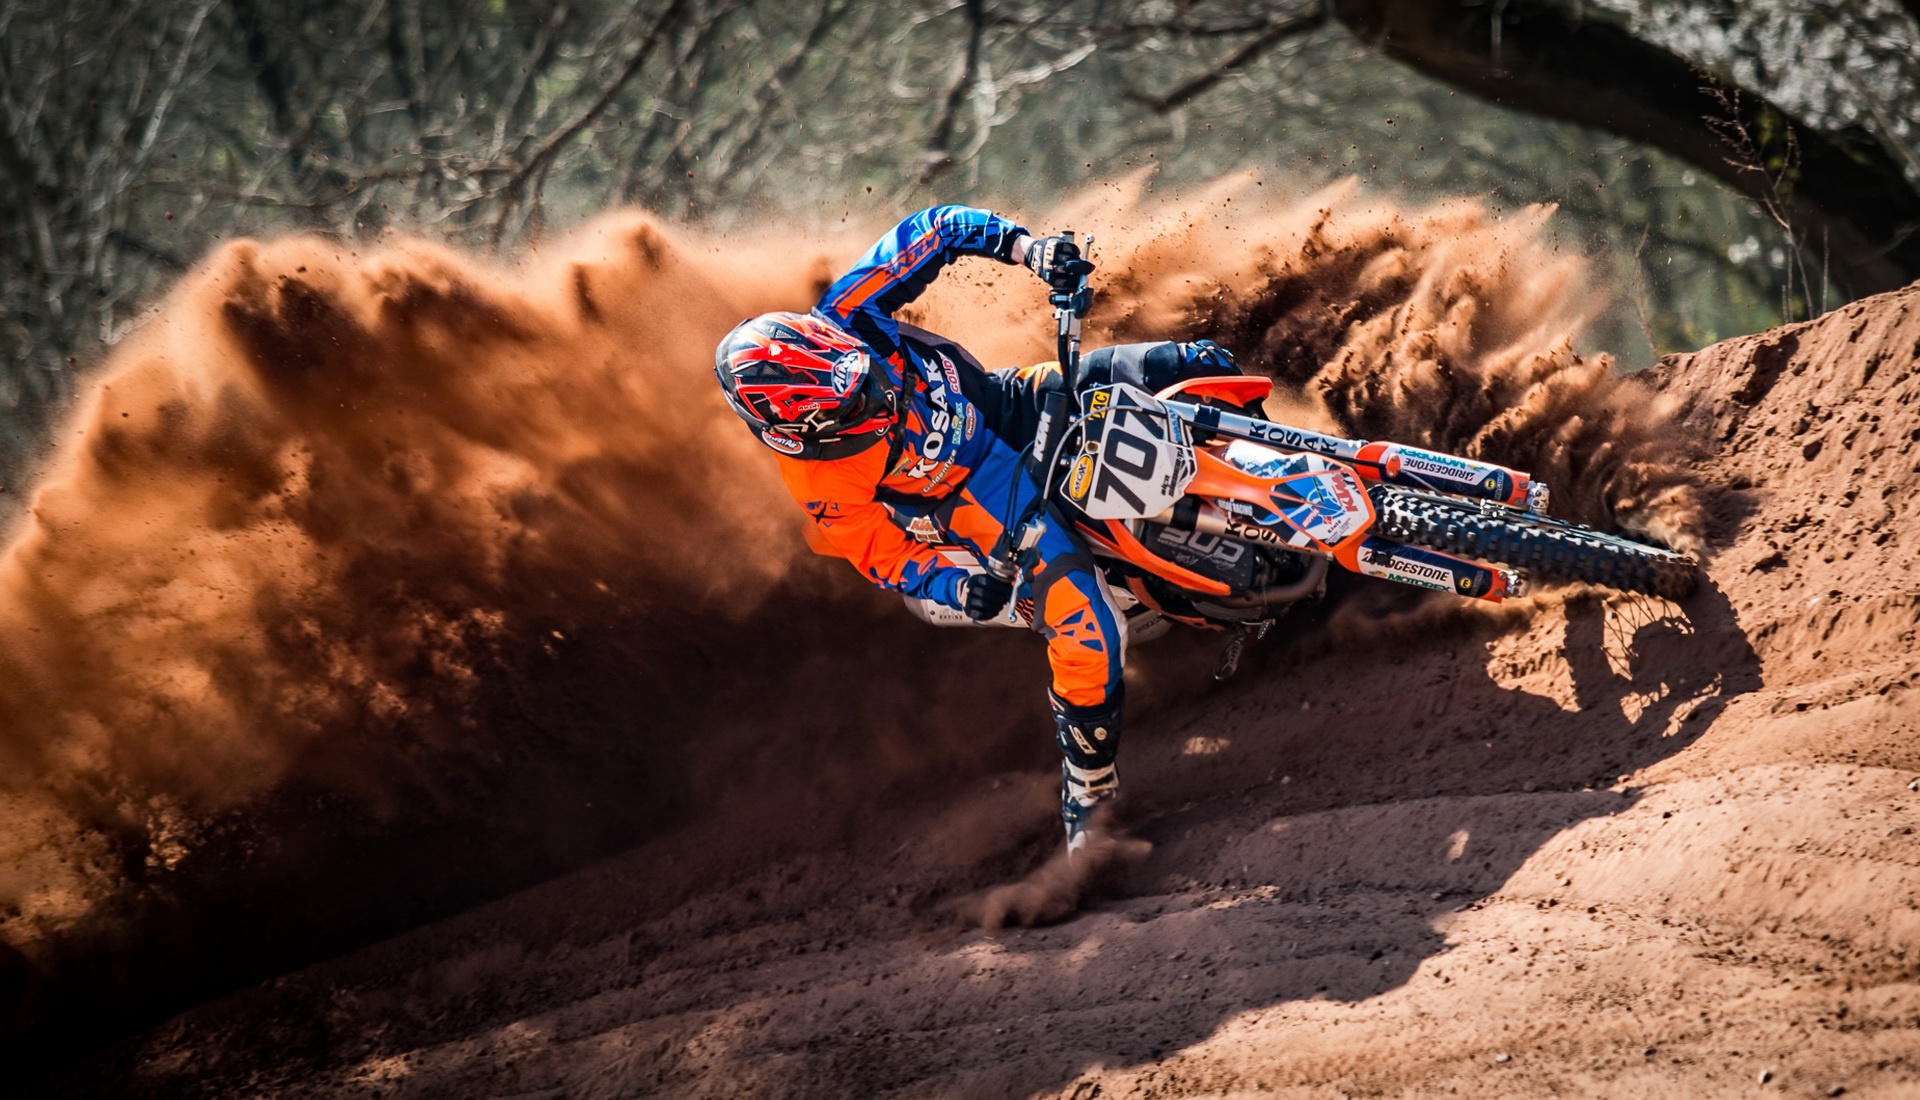 motocross, motorcycle, sports, dirt, vehicle